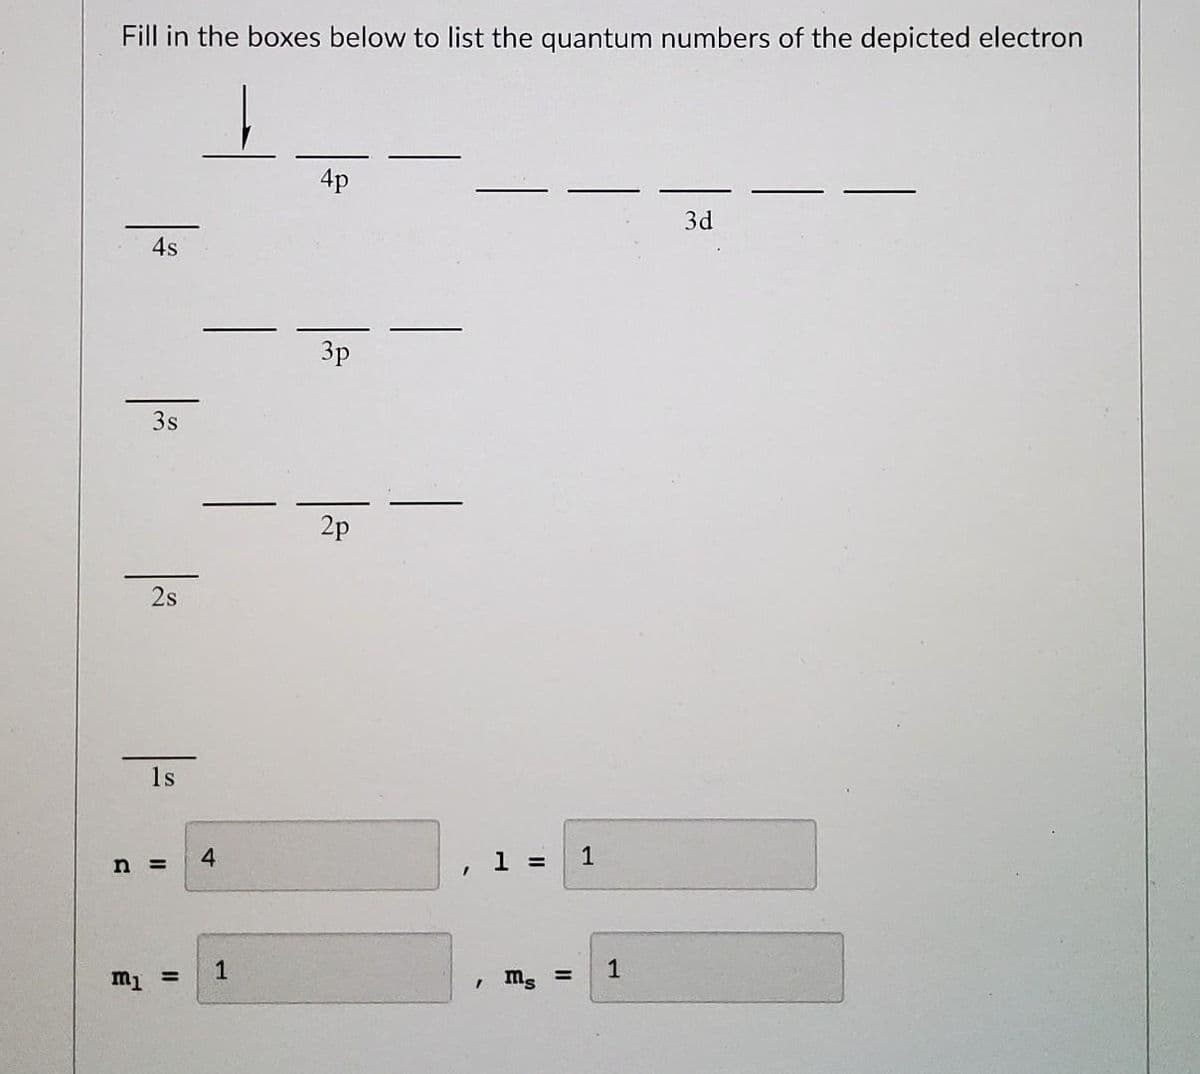 Fill in the boxes below to list the quantum numbers of the depicted electron
4s
3s
2s
1s
n =
m₁ =
st
4
1
4p
3p
2p
1 =
, Ms =
1
1
3d